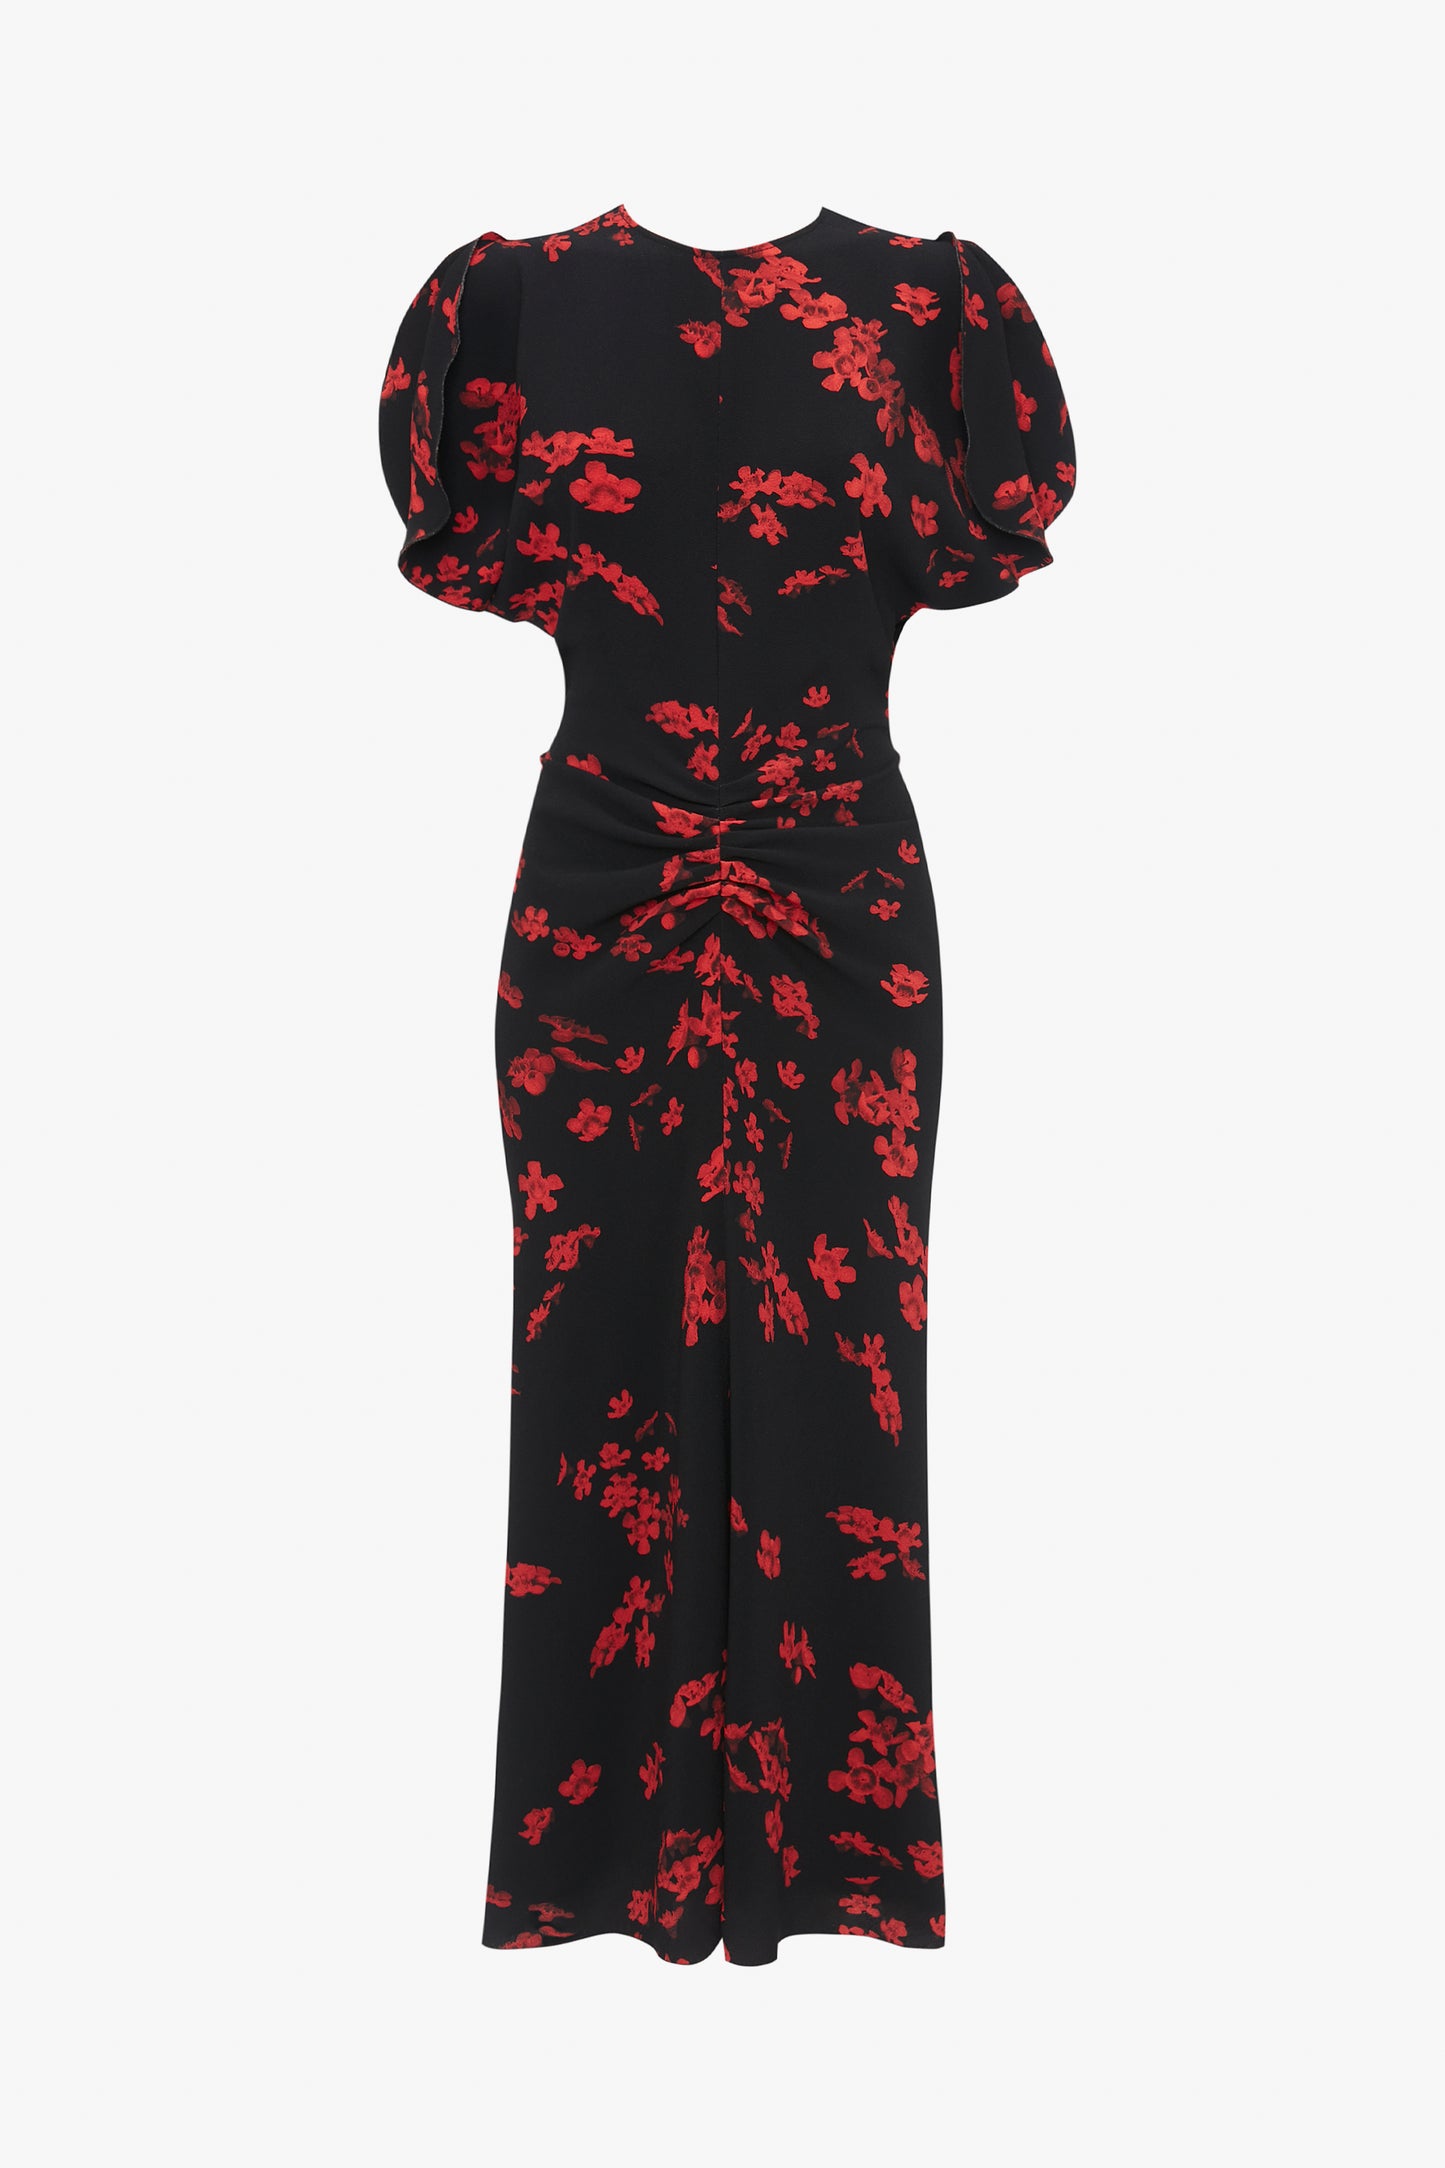 A Gathered Waist Midi Dress In Sci-Fi Black Floral by Victoria Beckham featuring puffed short sleeves and a red floral pattern, gathered at the waist for a fit-and-flare silhouette, extending to mid-calf.